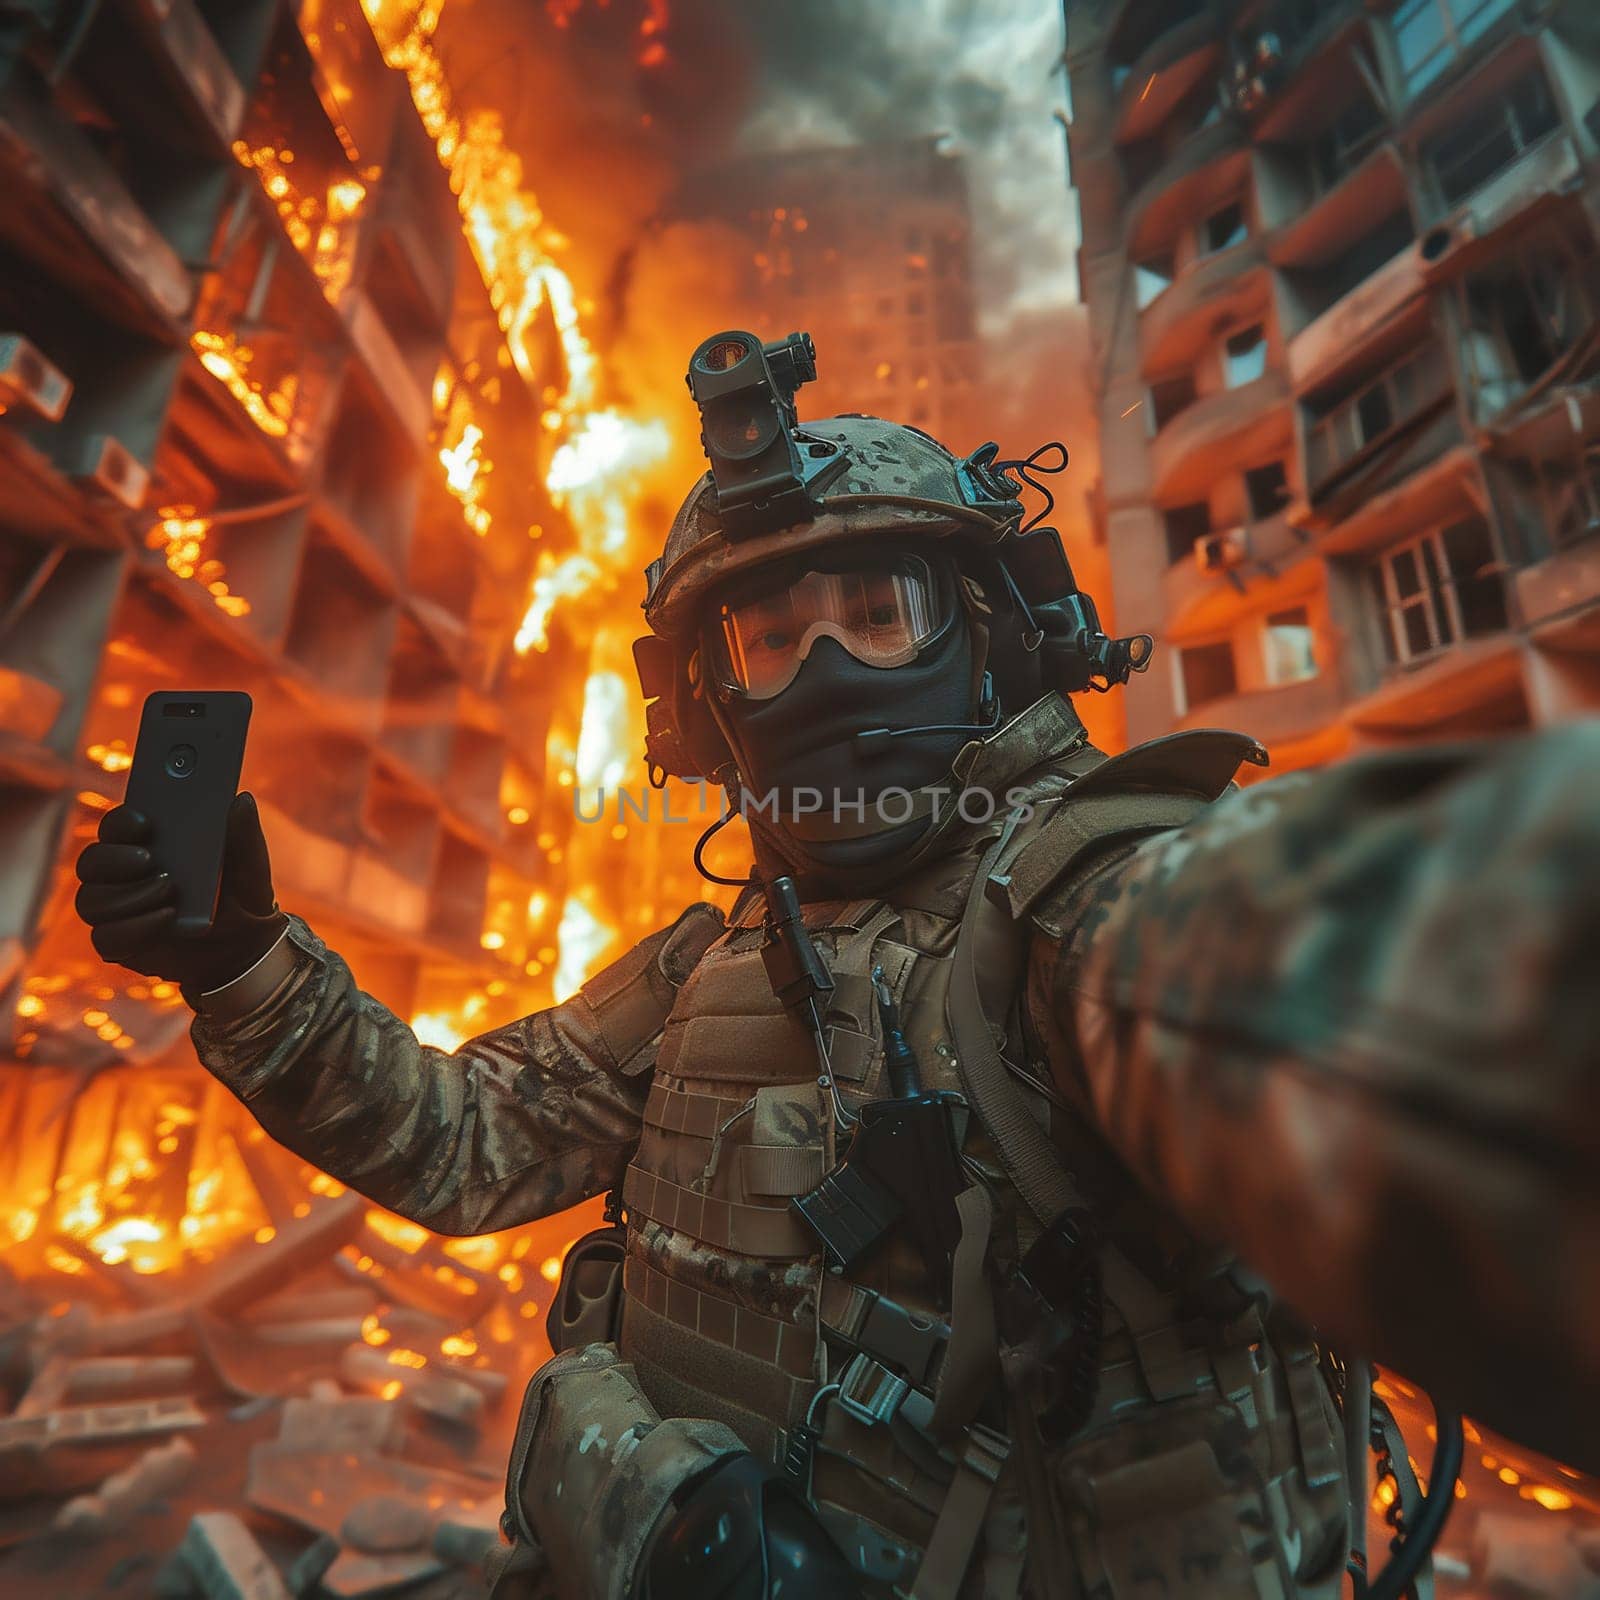 A soldier fights in a warforest area surrounded by fire by Andelov13